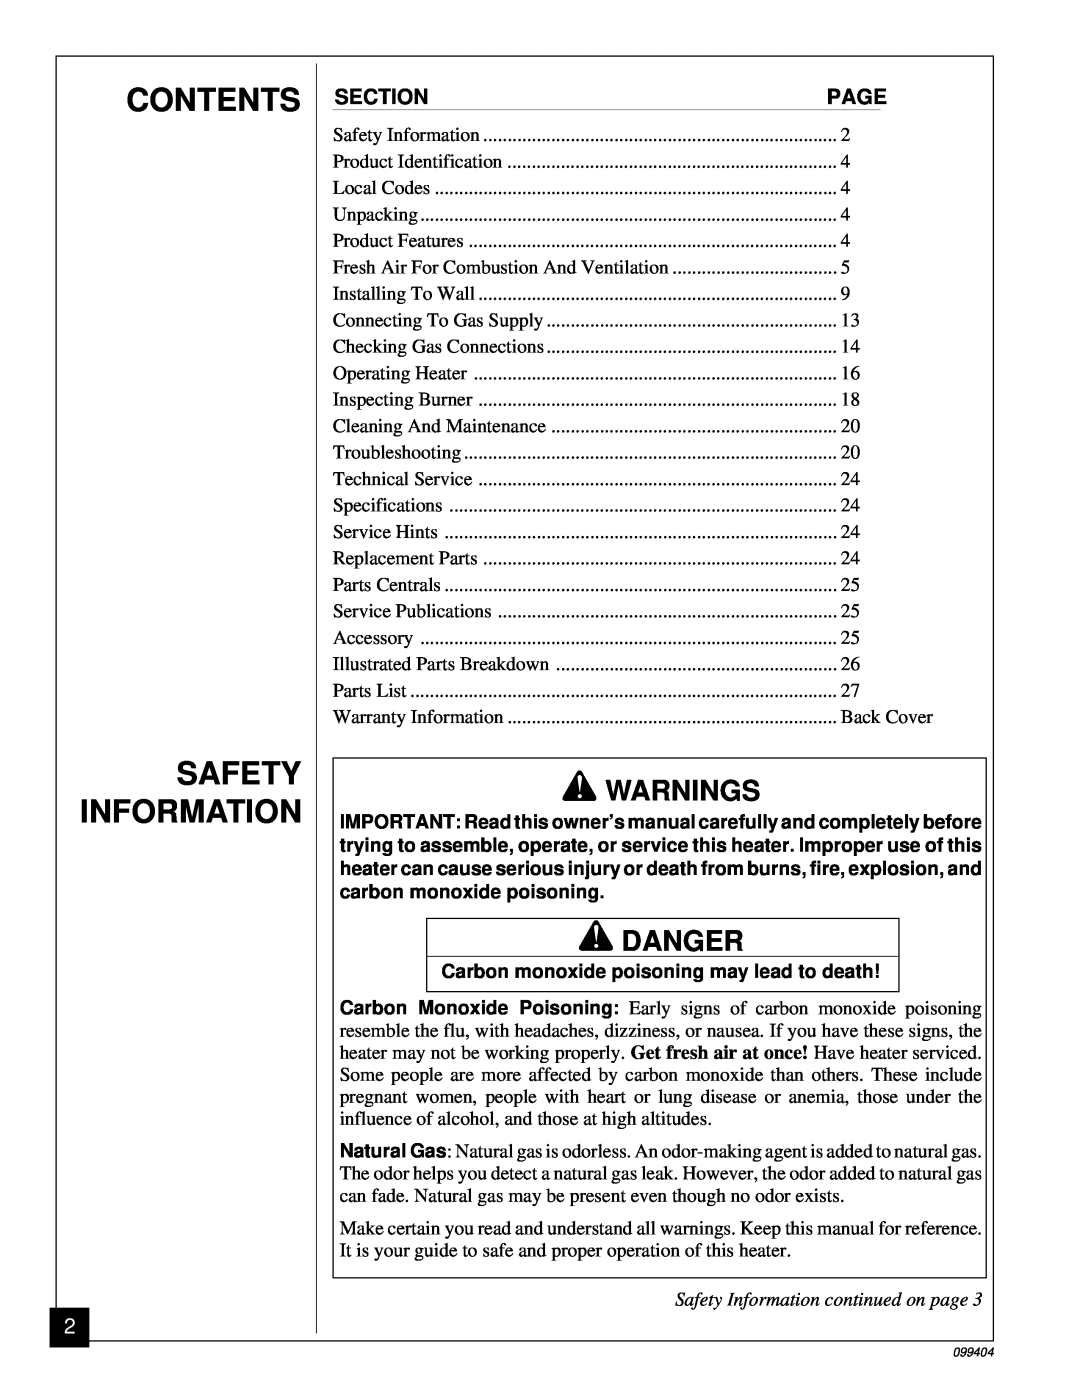 Desa CGN10 installation manual Contents Safety Information, Danger, Carbon monoxide poisoning may lead to death 